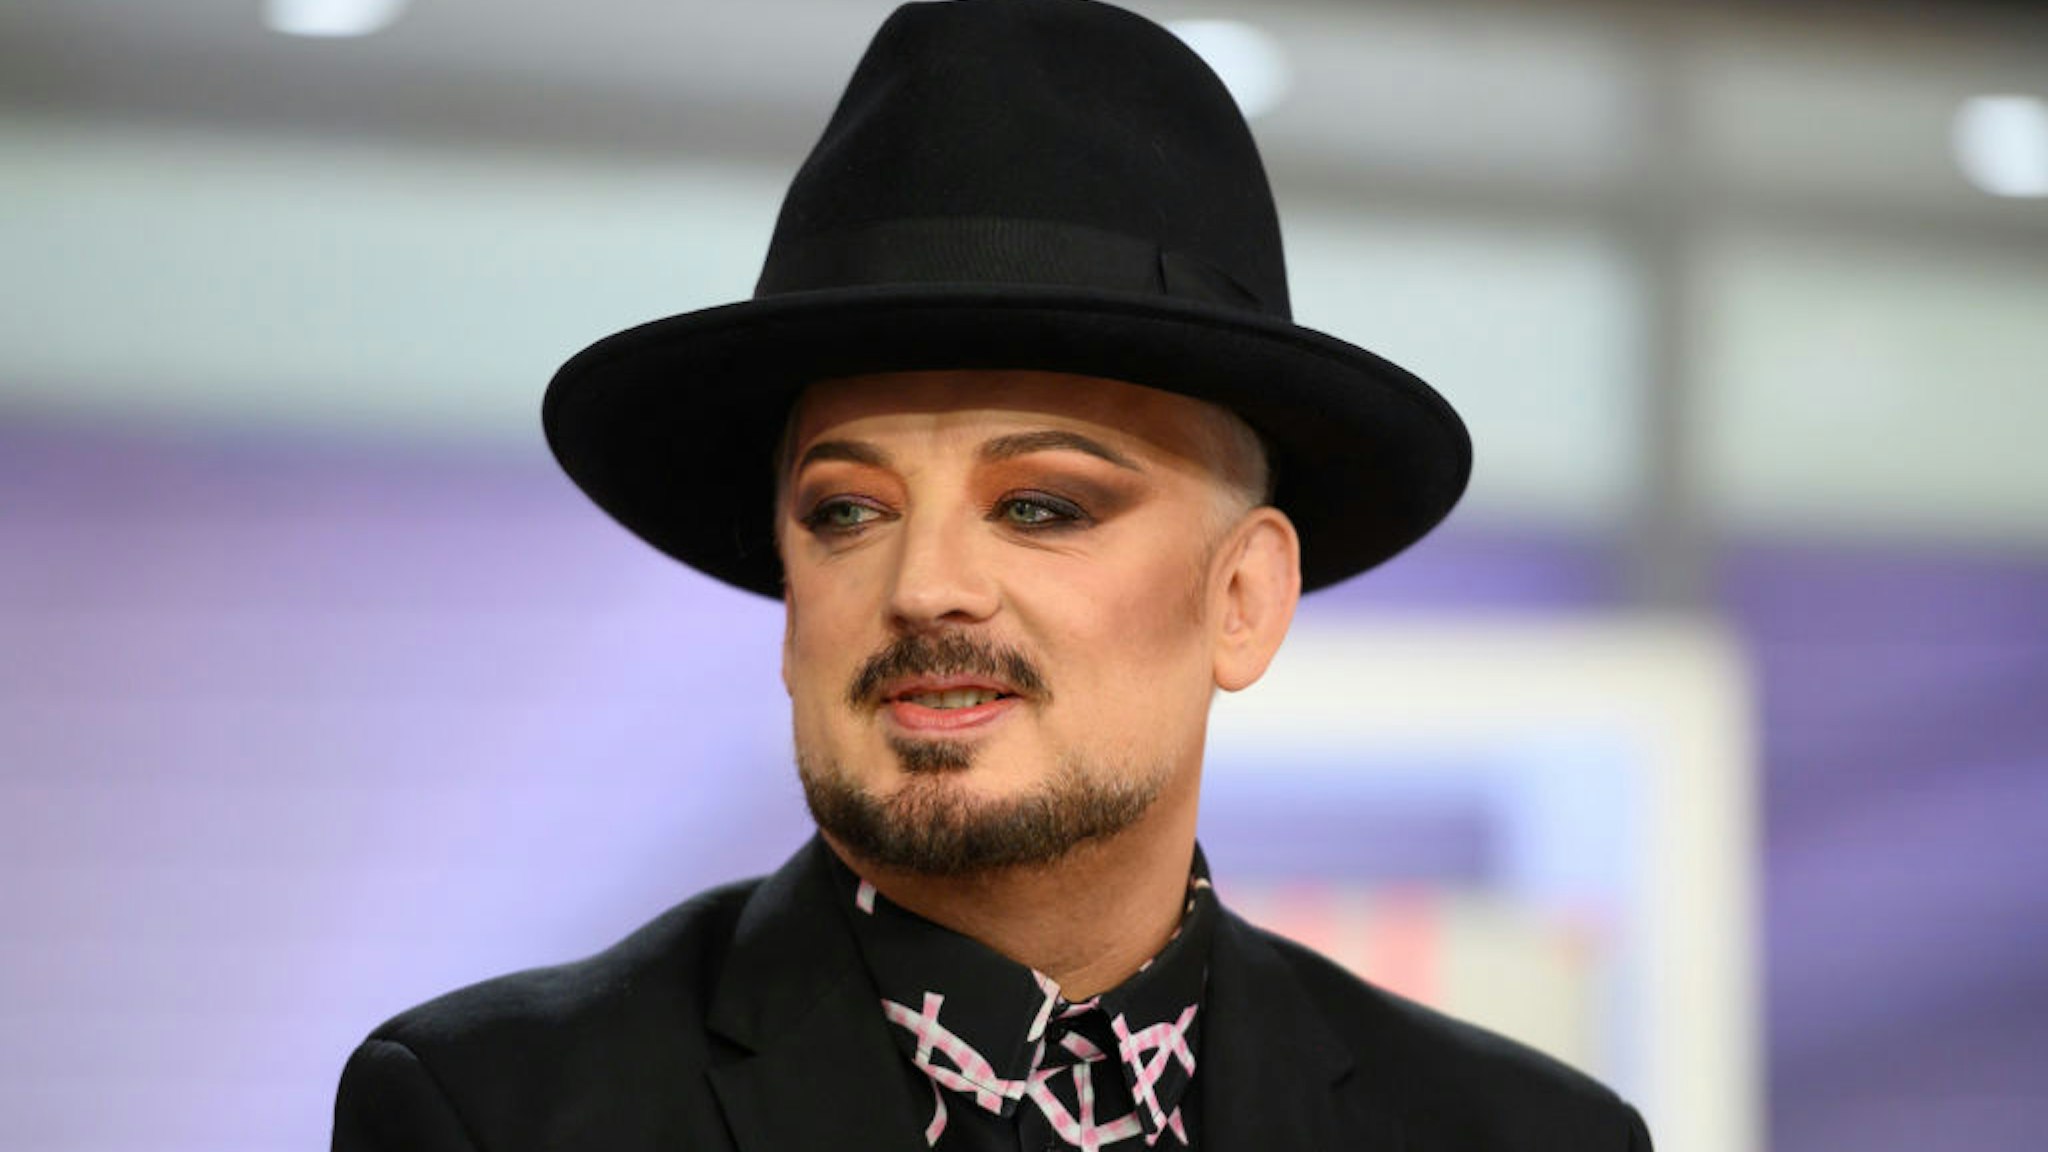 Boy George on Wednesday, May 1, 2019